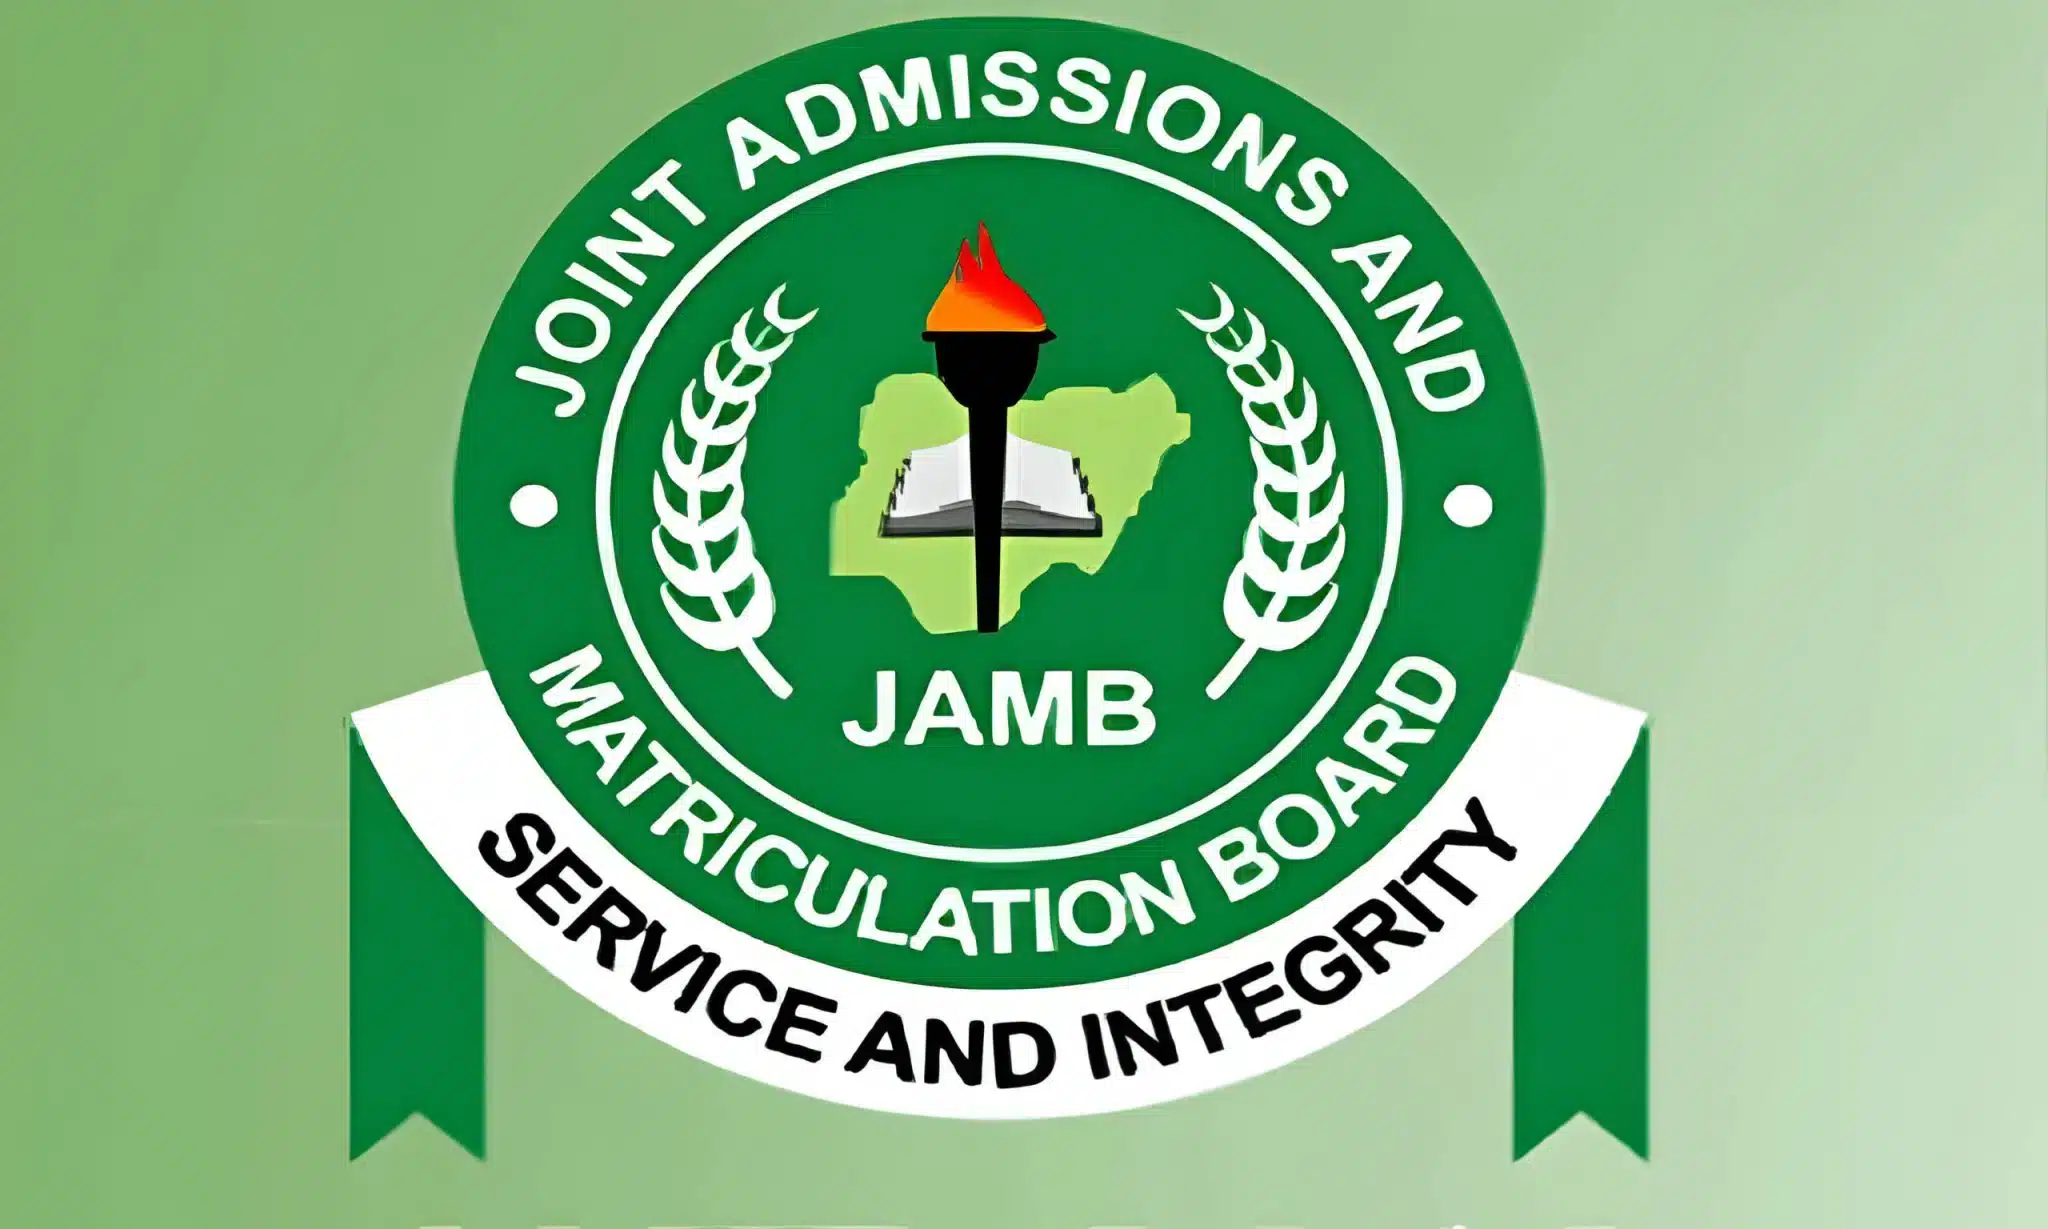 No Certificate Verification, No Direct Entry Admissions Processing – JAMB Warns